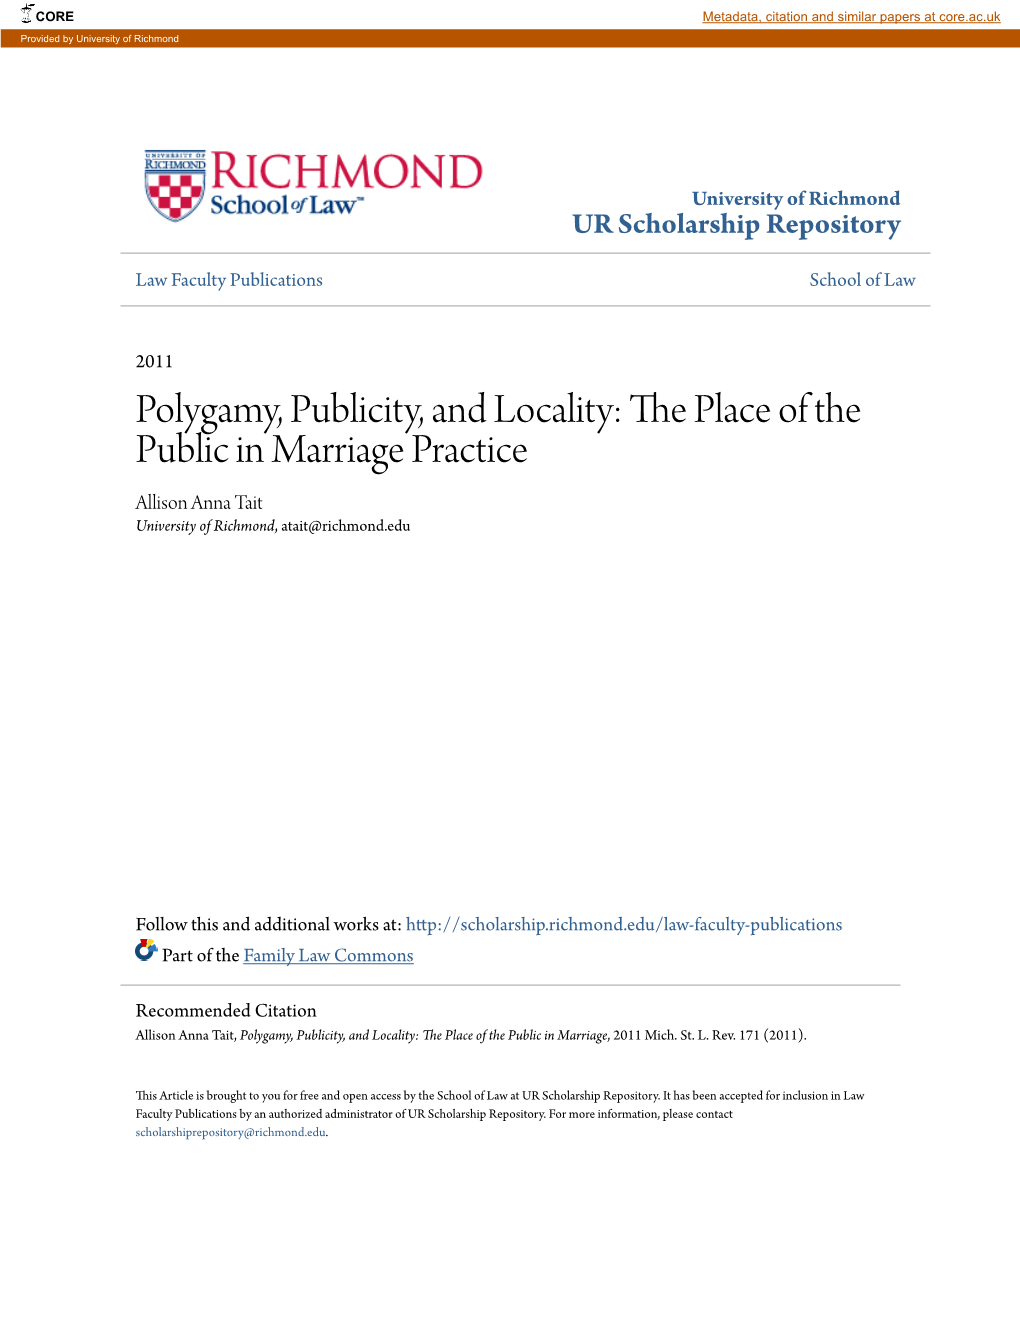 Polygamy, Publicity, and Locality: the Place of the Public in Marriage, 2011 Mich